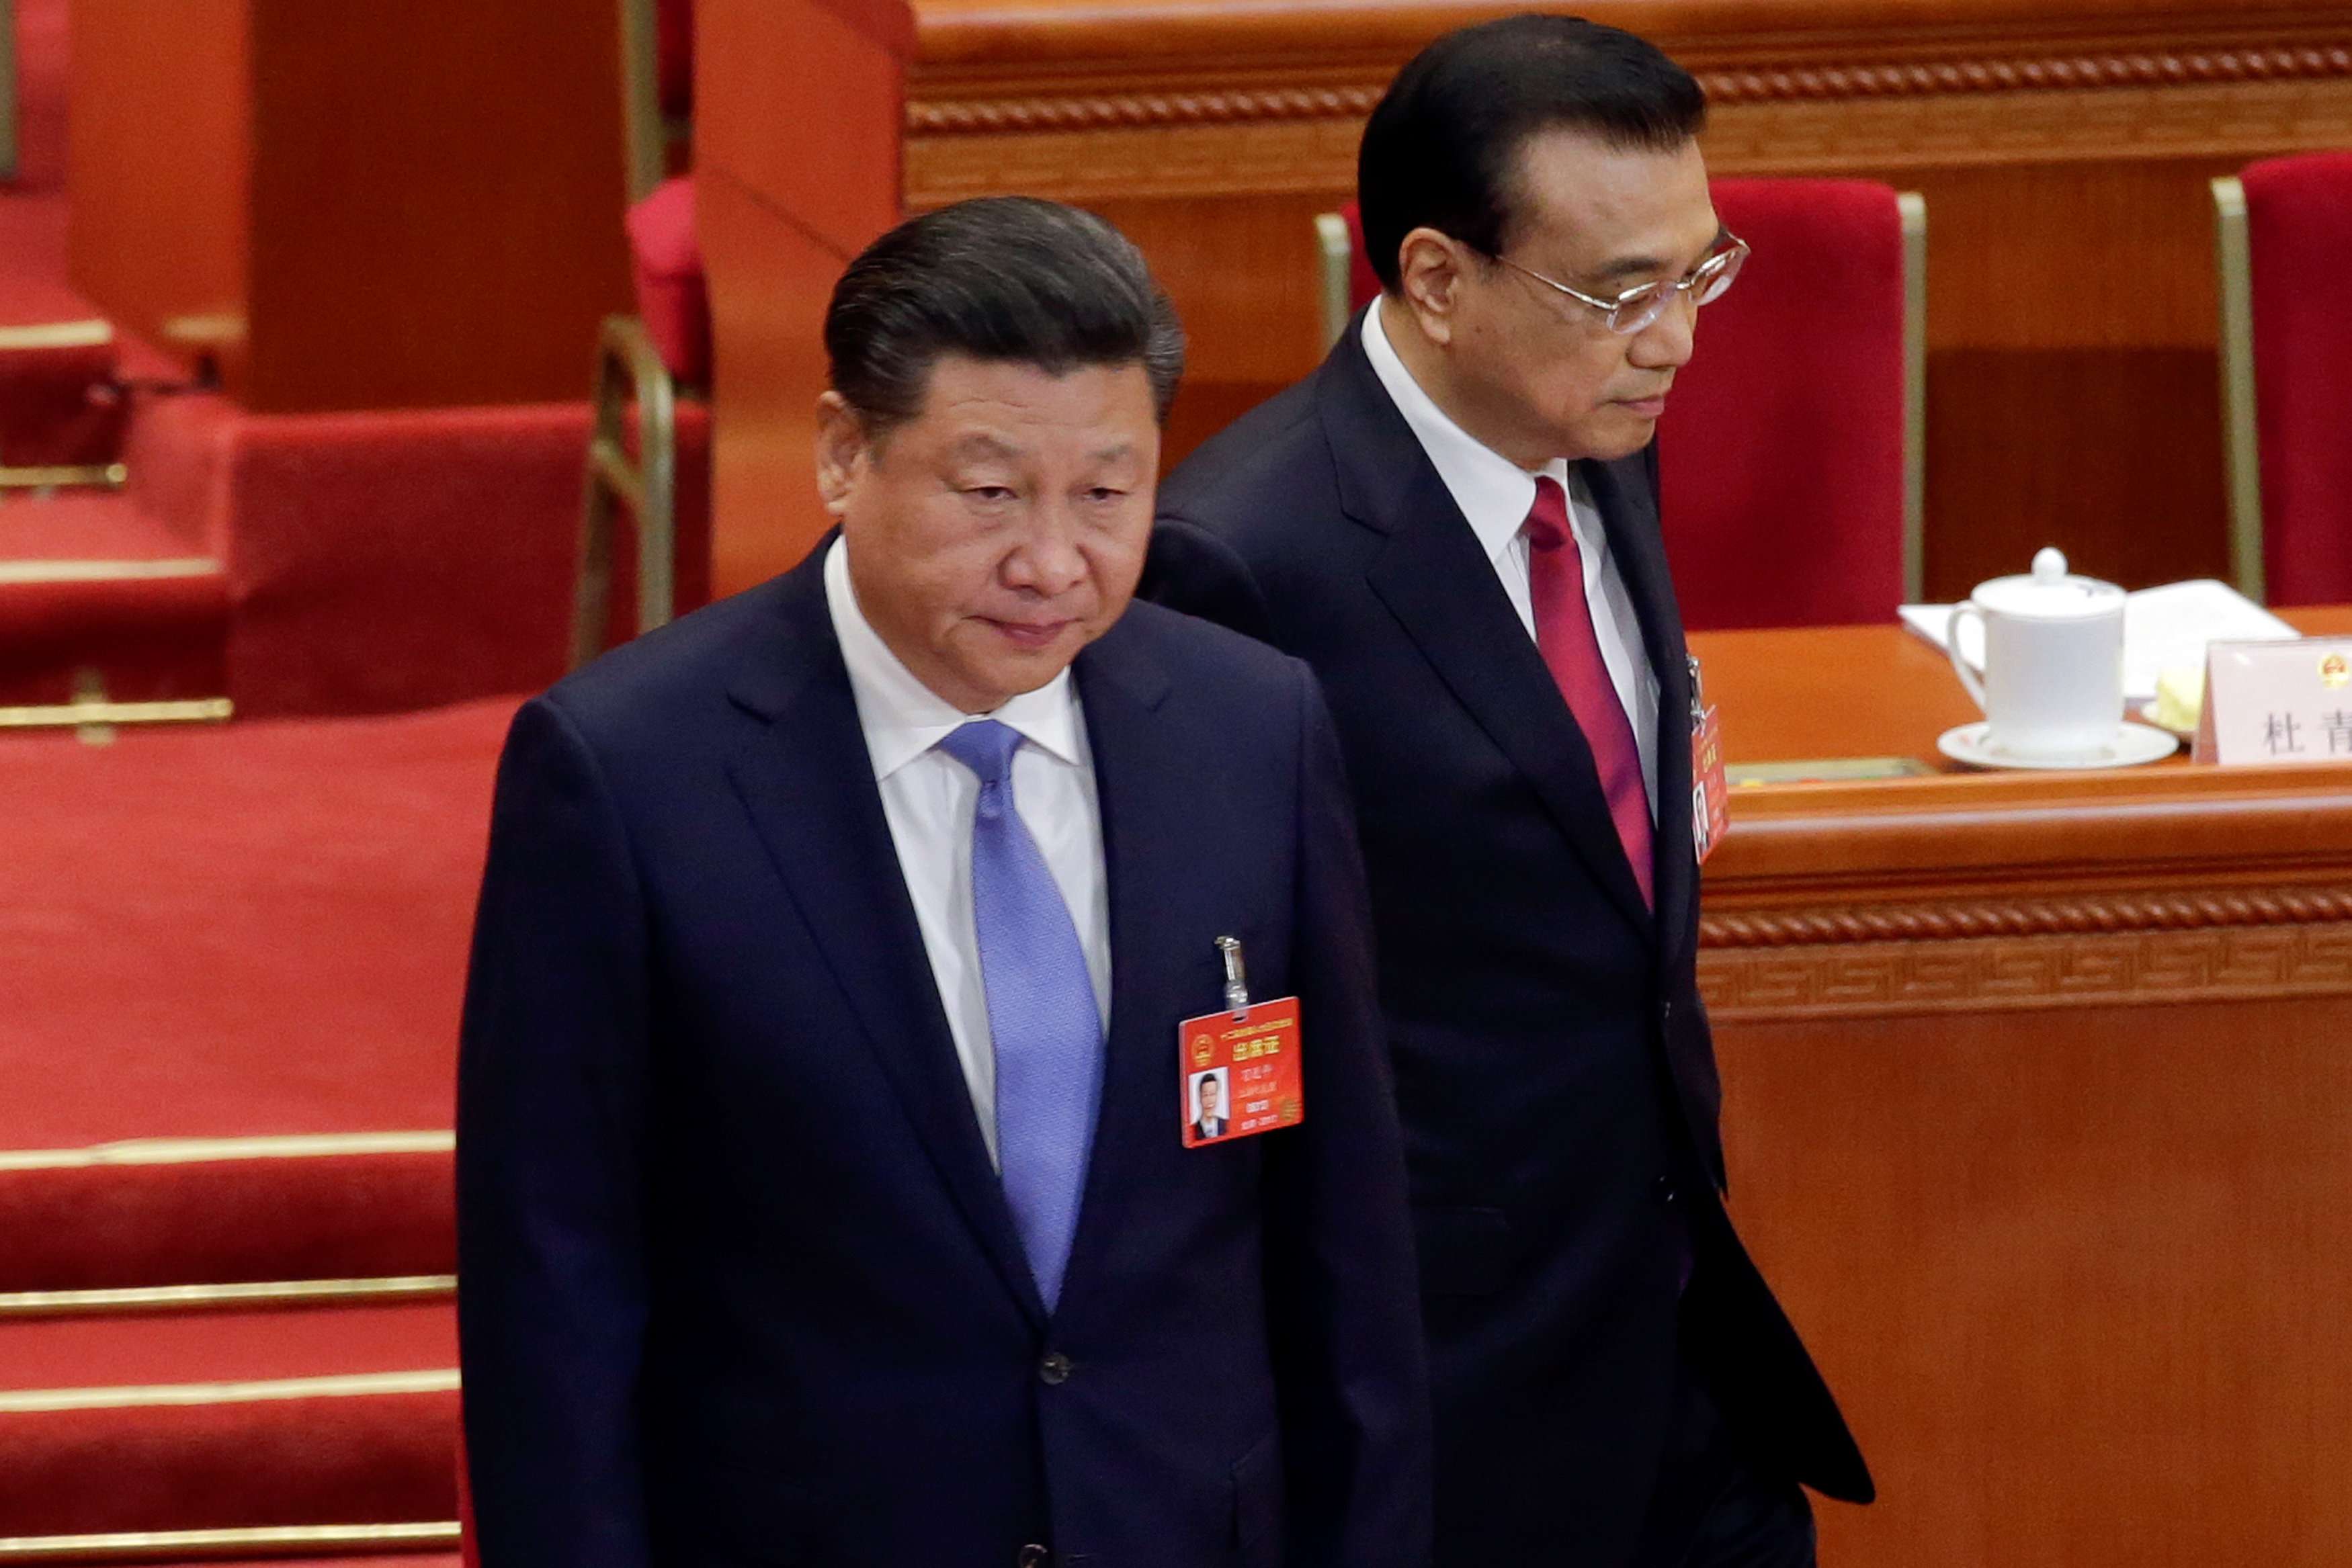 President Xi Jinping and Premier Li Keqiang arrive for the opening session of the National People's Congress in Beijing. Photo: Reuters